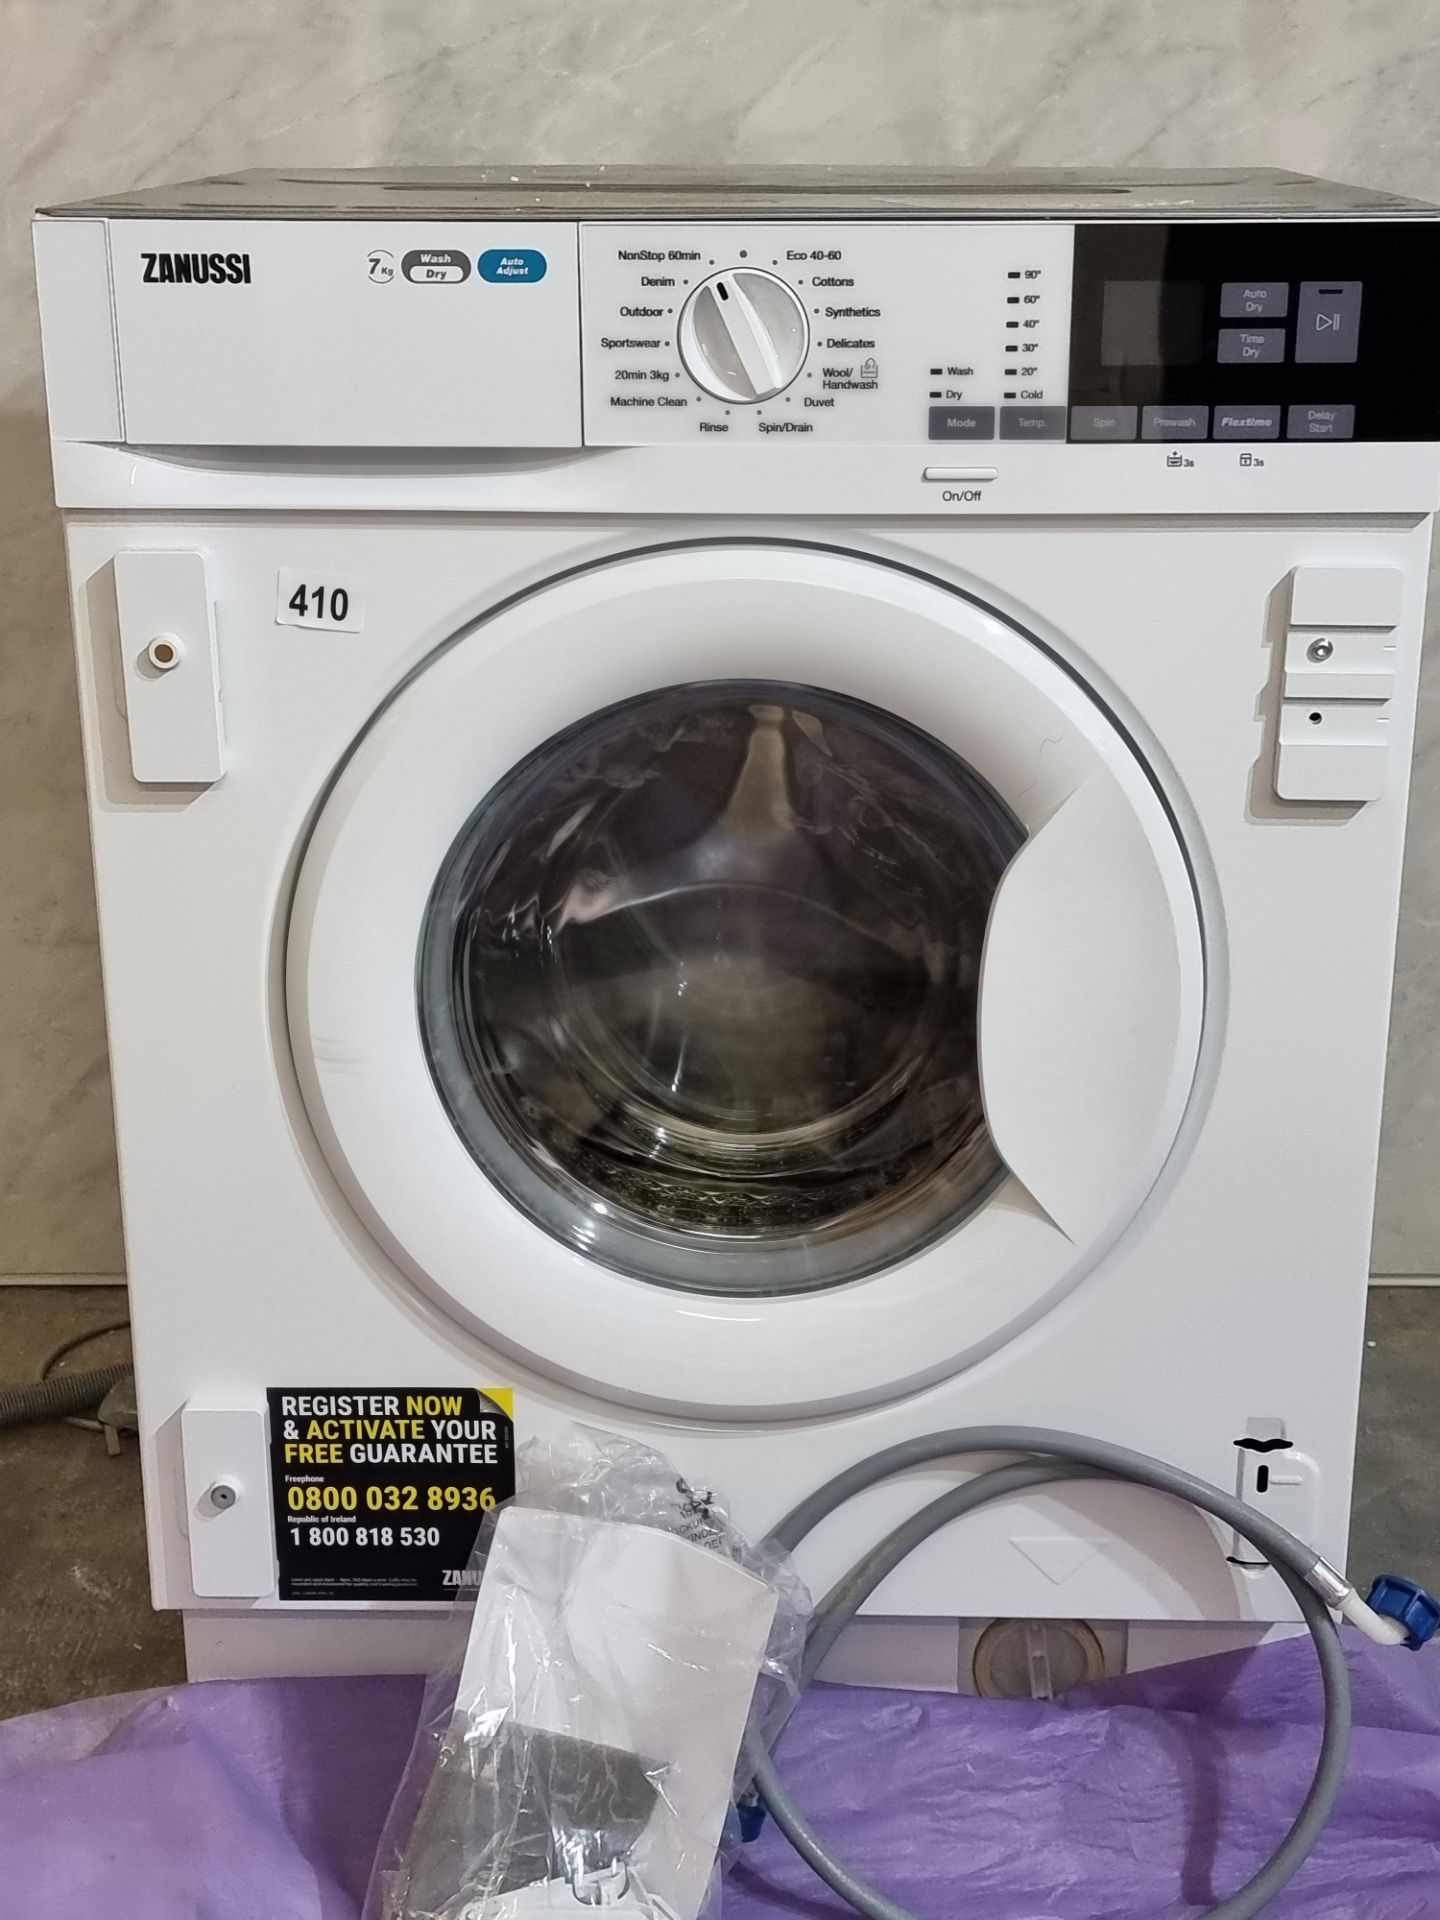 Zanussi Z716WT83BI Integrated 7Kg / 4Kg Washer Dryer with 1550 rpm - White - E Rated RRP £650